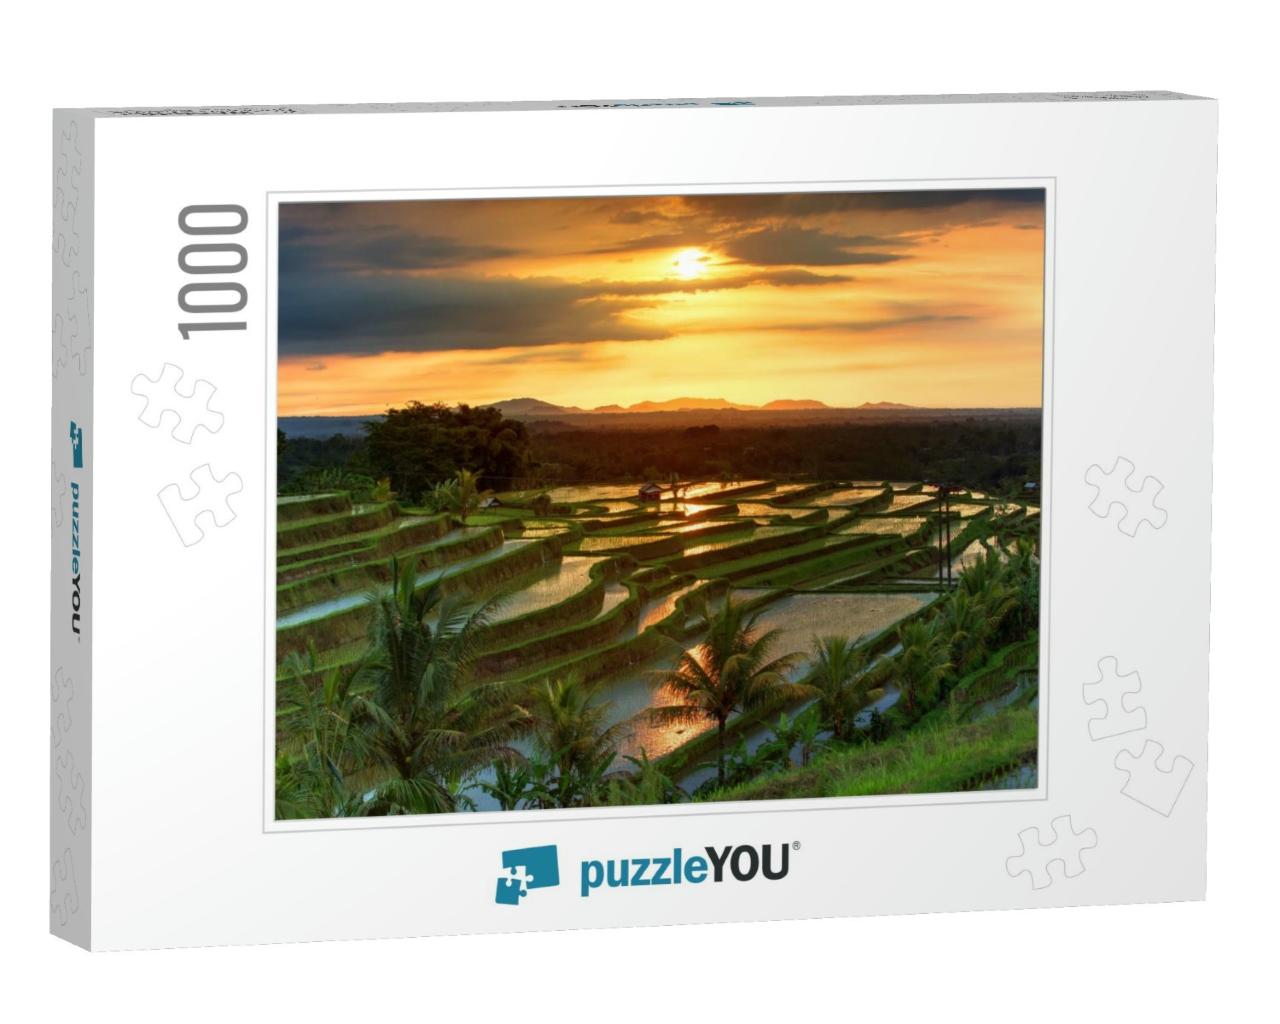 Famous Jatiluwih Rice Terraces on Bali During Sunrise, In... Jigsaw Puzzle with 1000 pieces